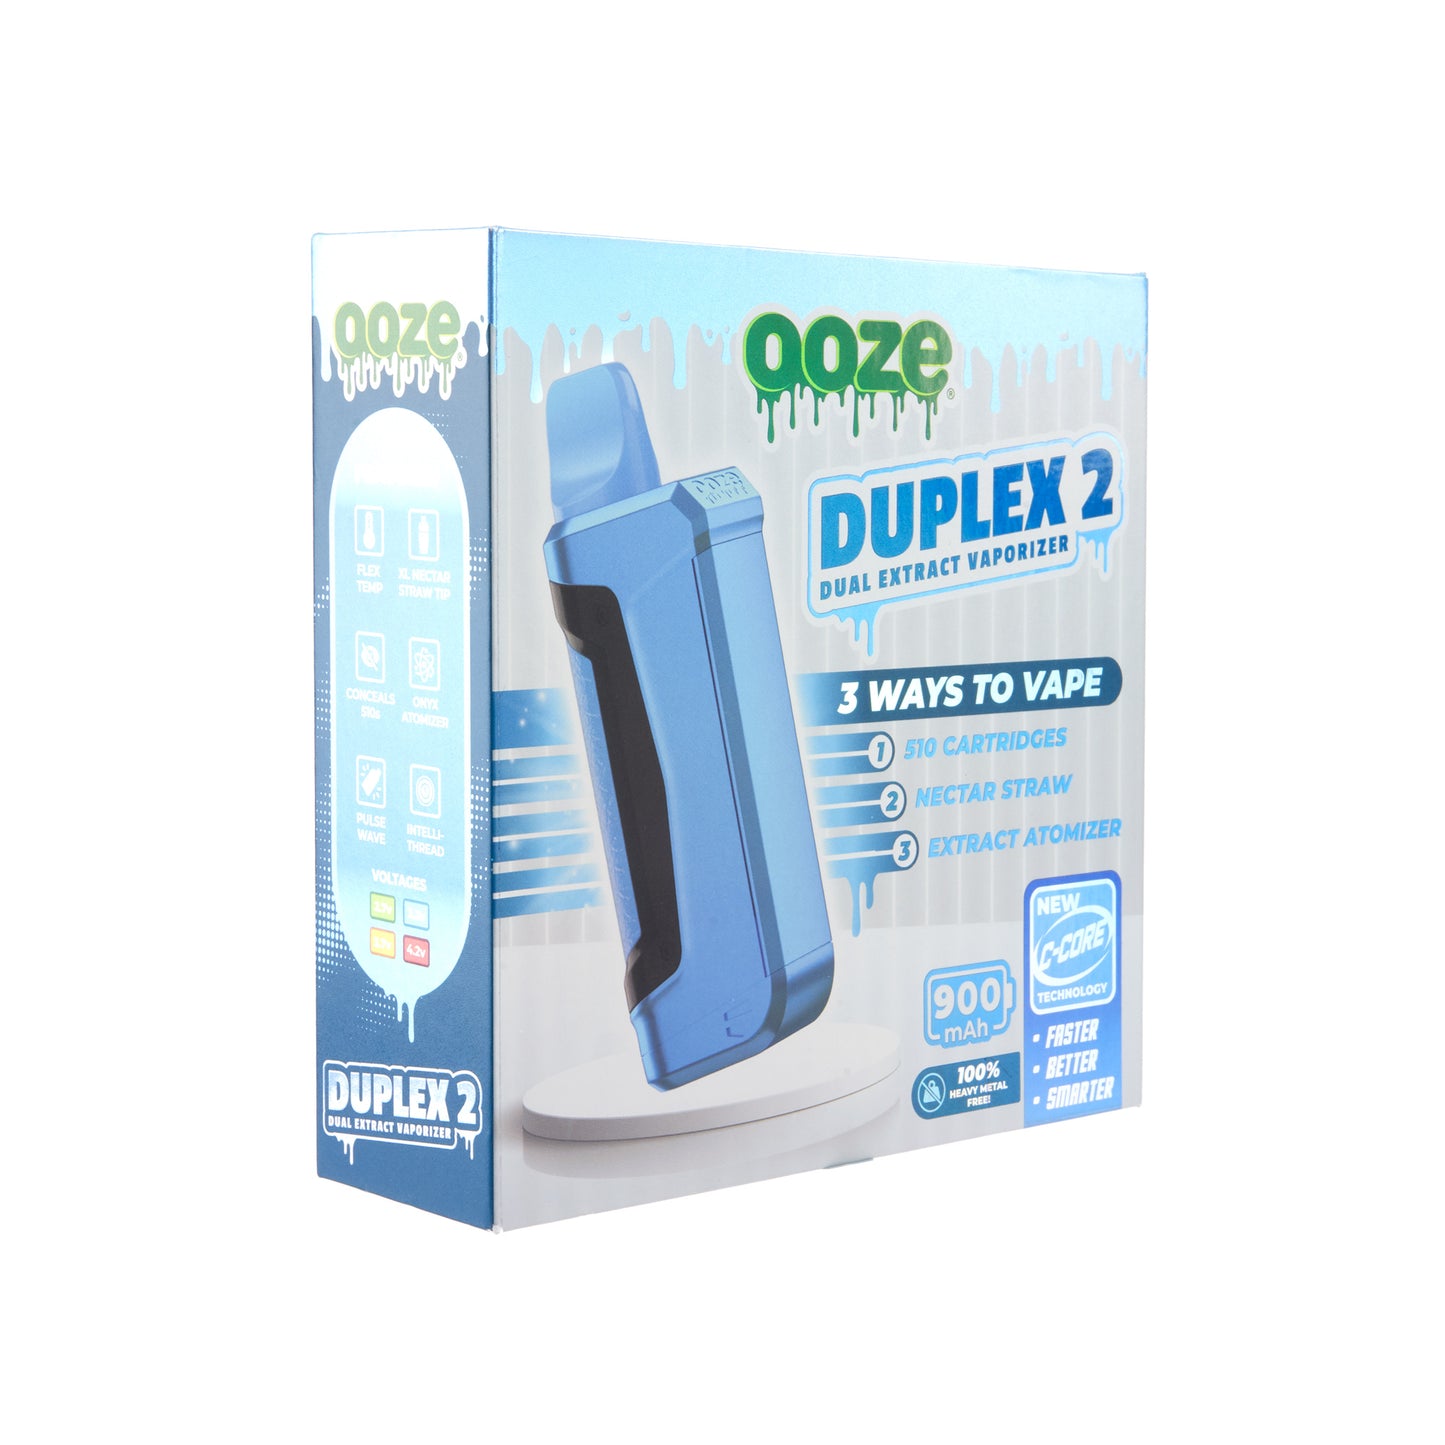 The box for The arctic blue Ooze Duplex 2 extract vaporizer